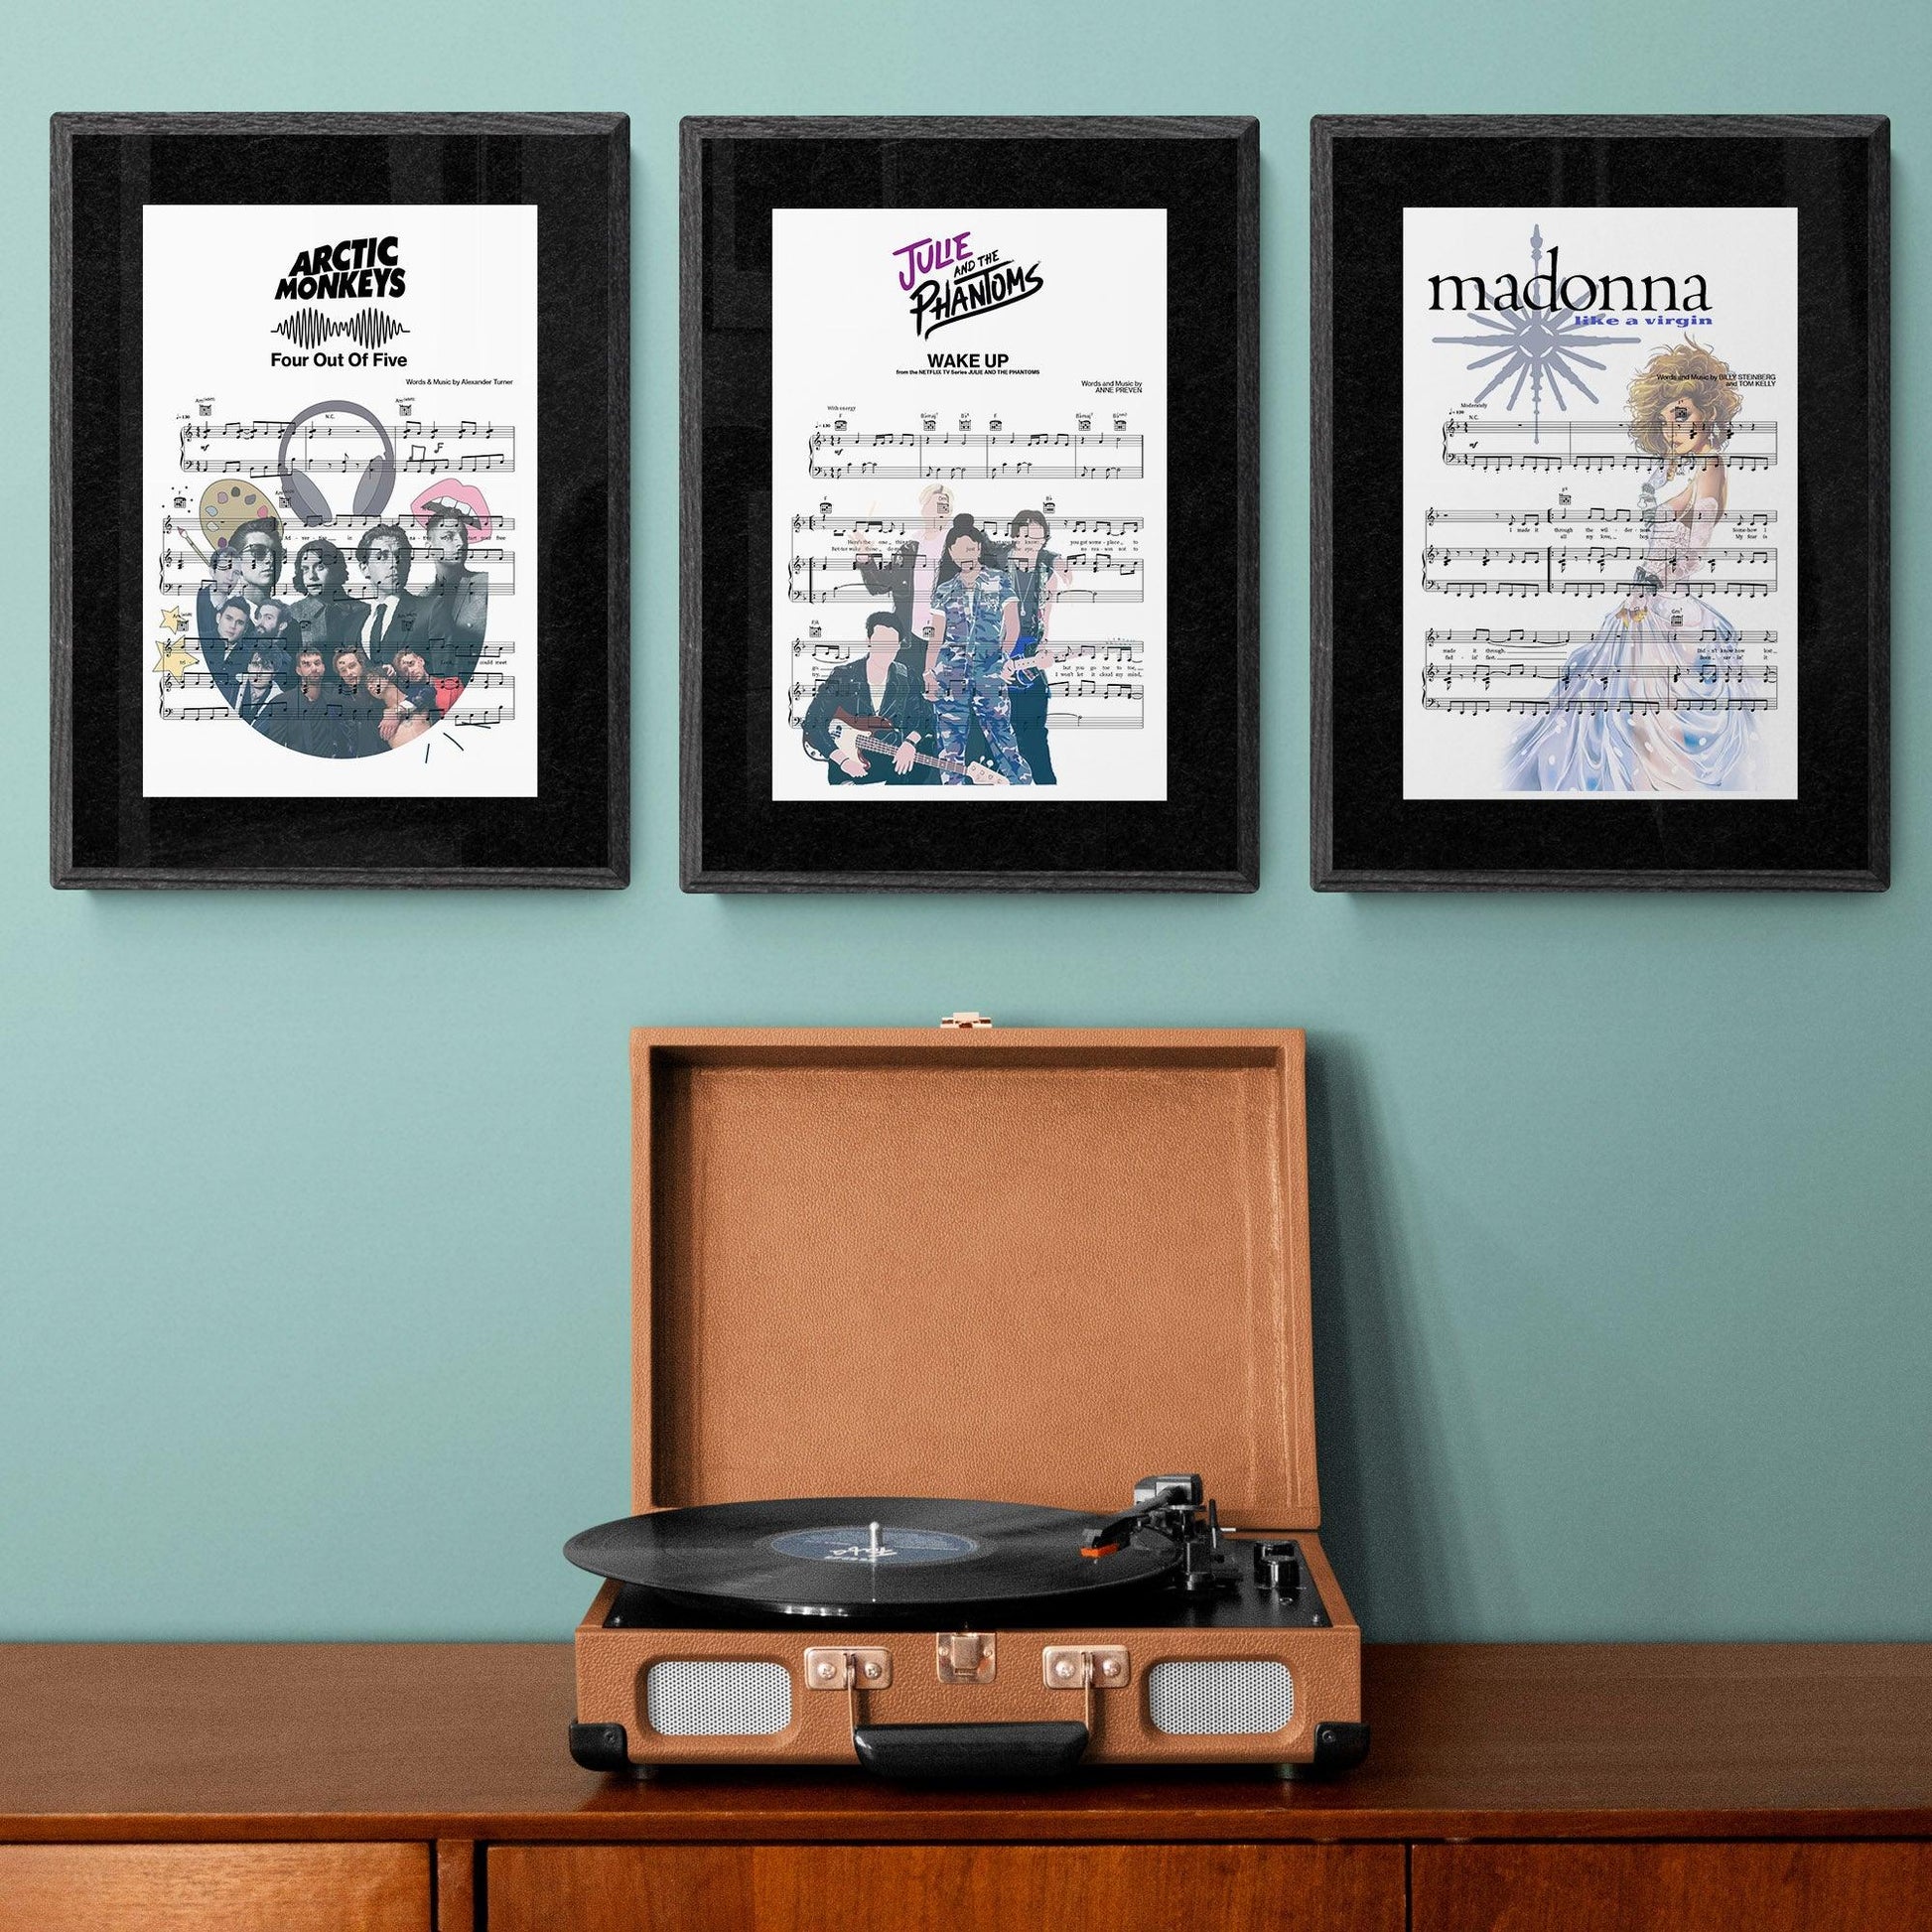 Julie and the Phantoms - wake up Song Print | Song Music Sheet Notes Print  Everyone has a favorite song especially Julie and the Phantoms Print, and now you can show the score as printed staff. The personal favorite song sheet print shows the song chosen as the score. 